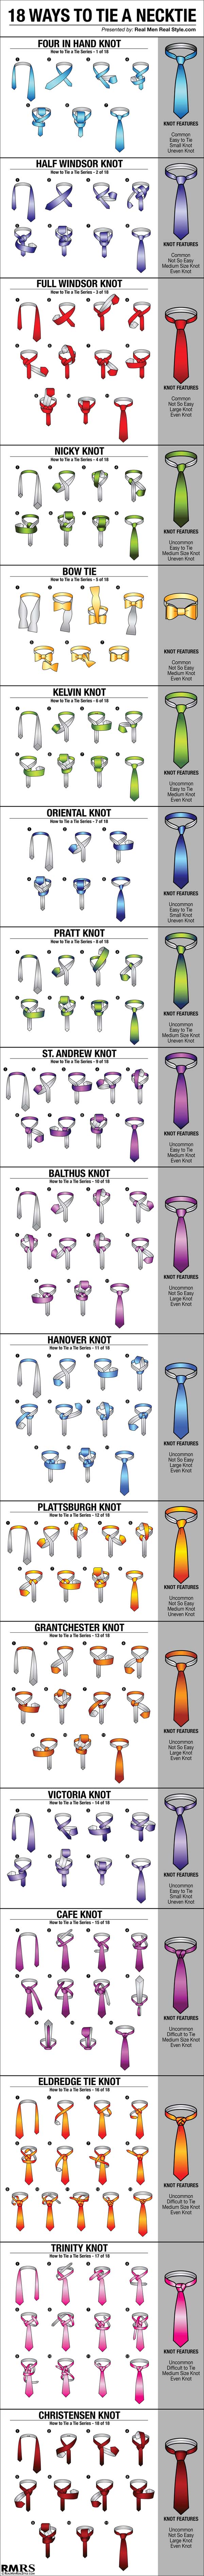 different types of tie knots